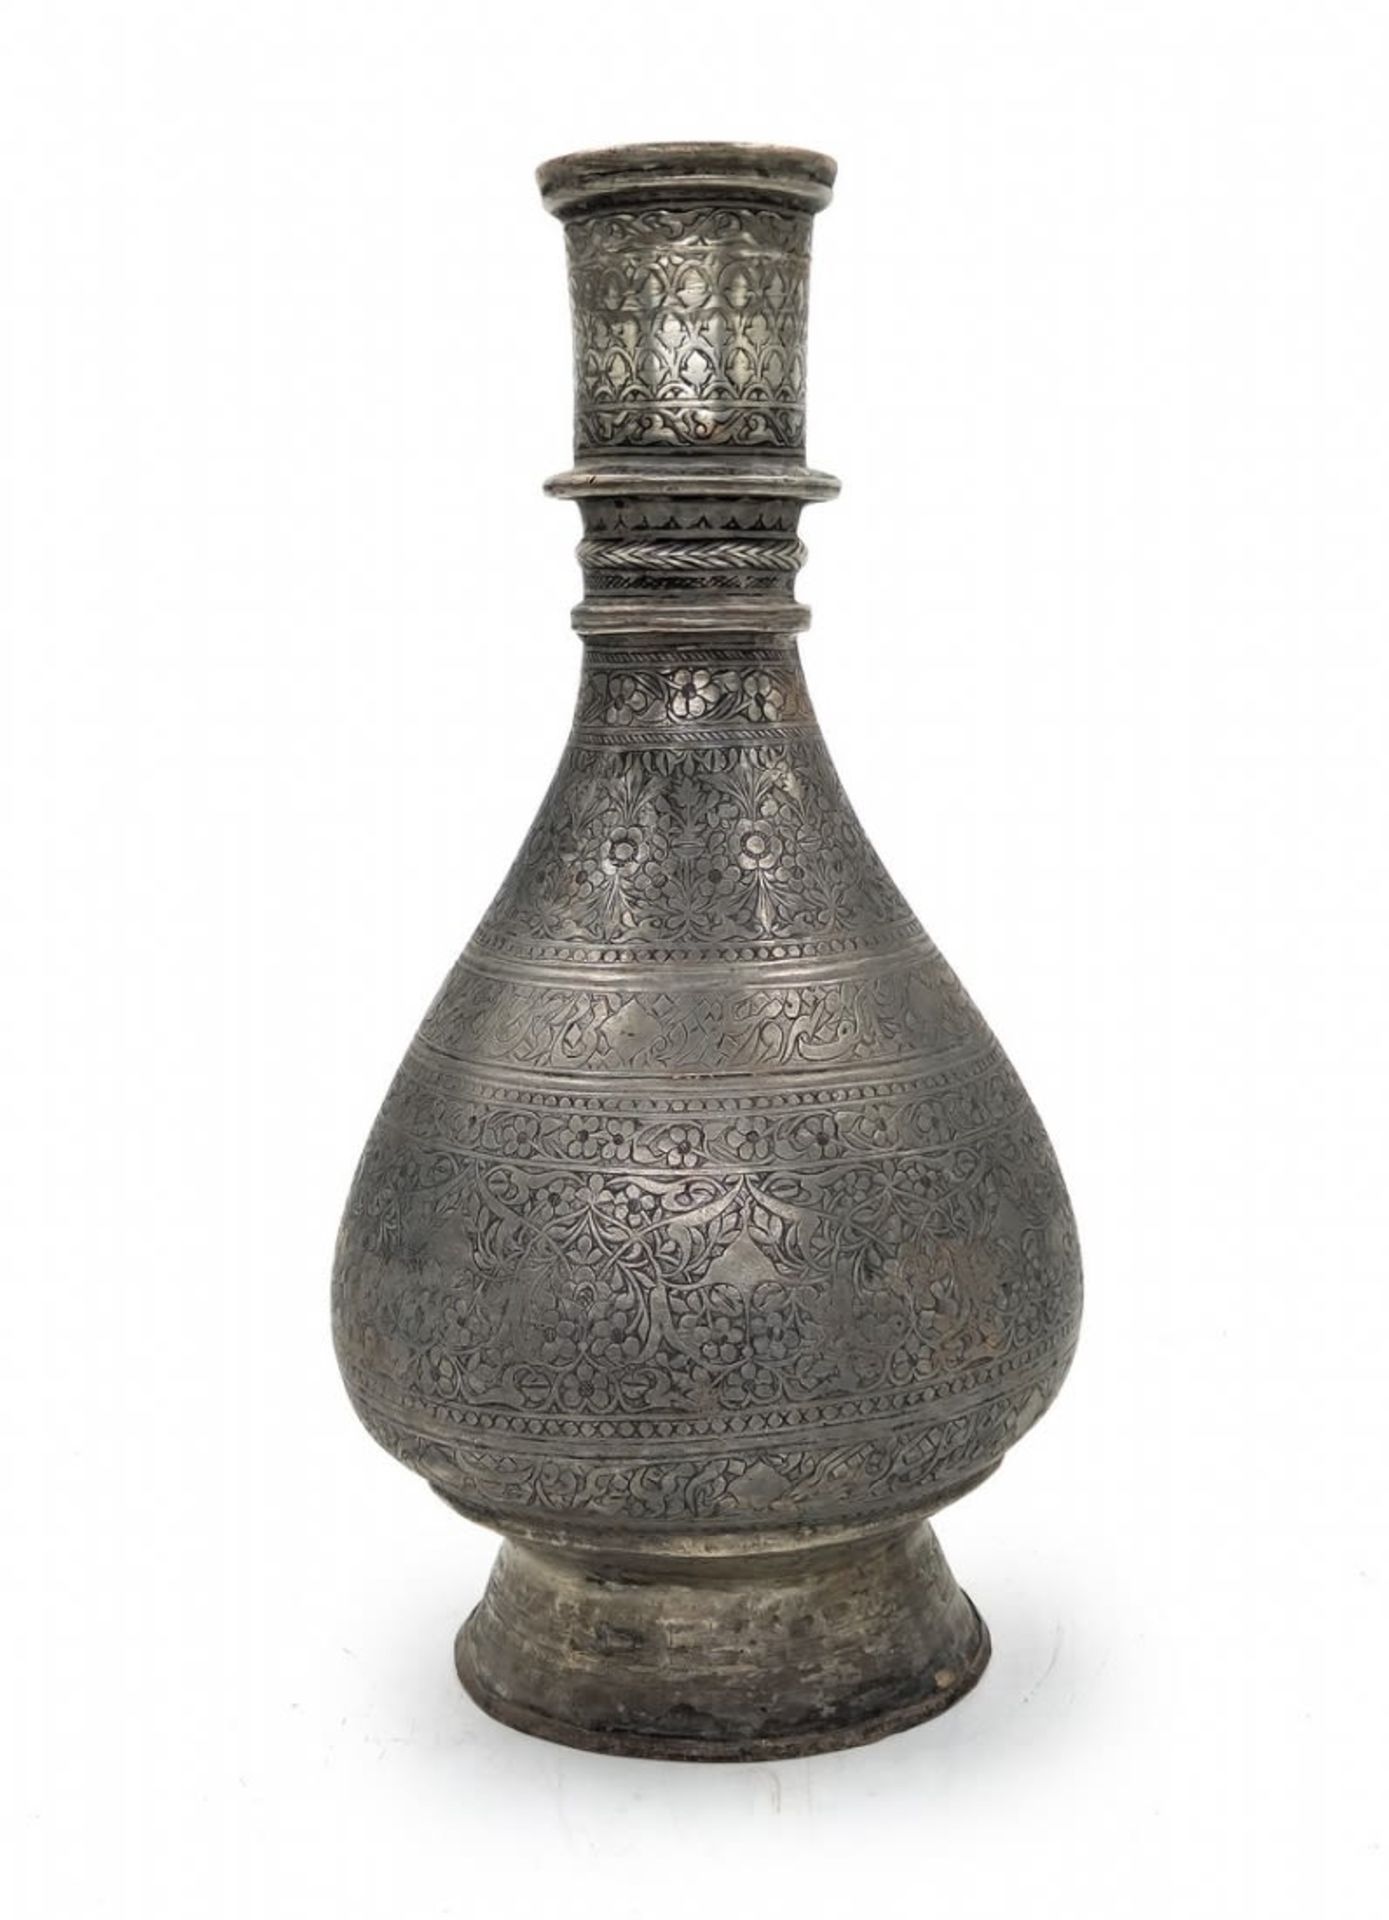 An antique Islamic hookah base, end of the 18th century., from the time of the Mughal Empire, - Image 2 of 7